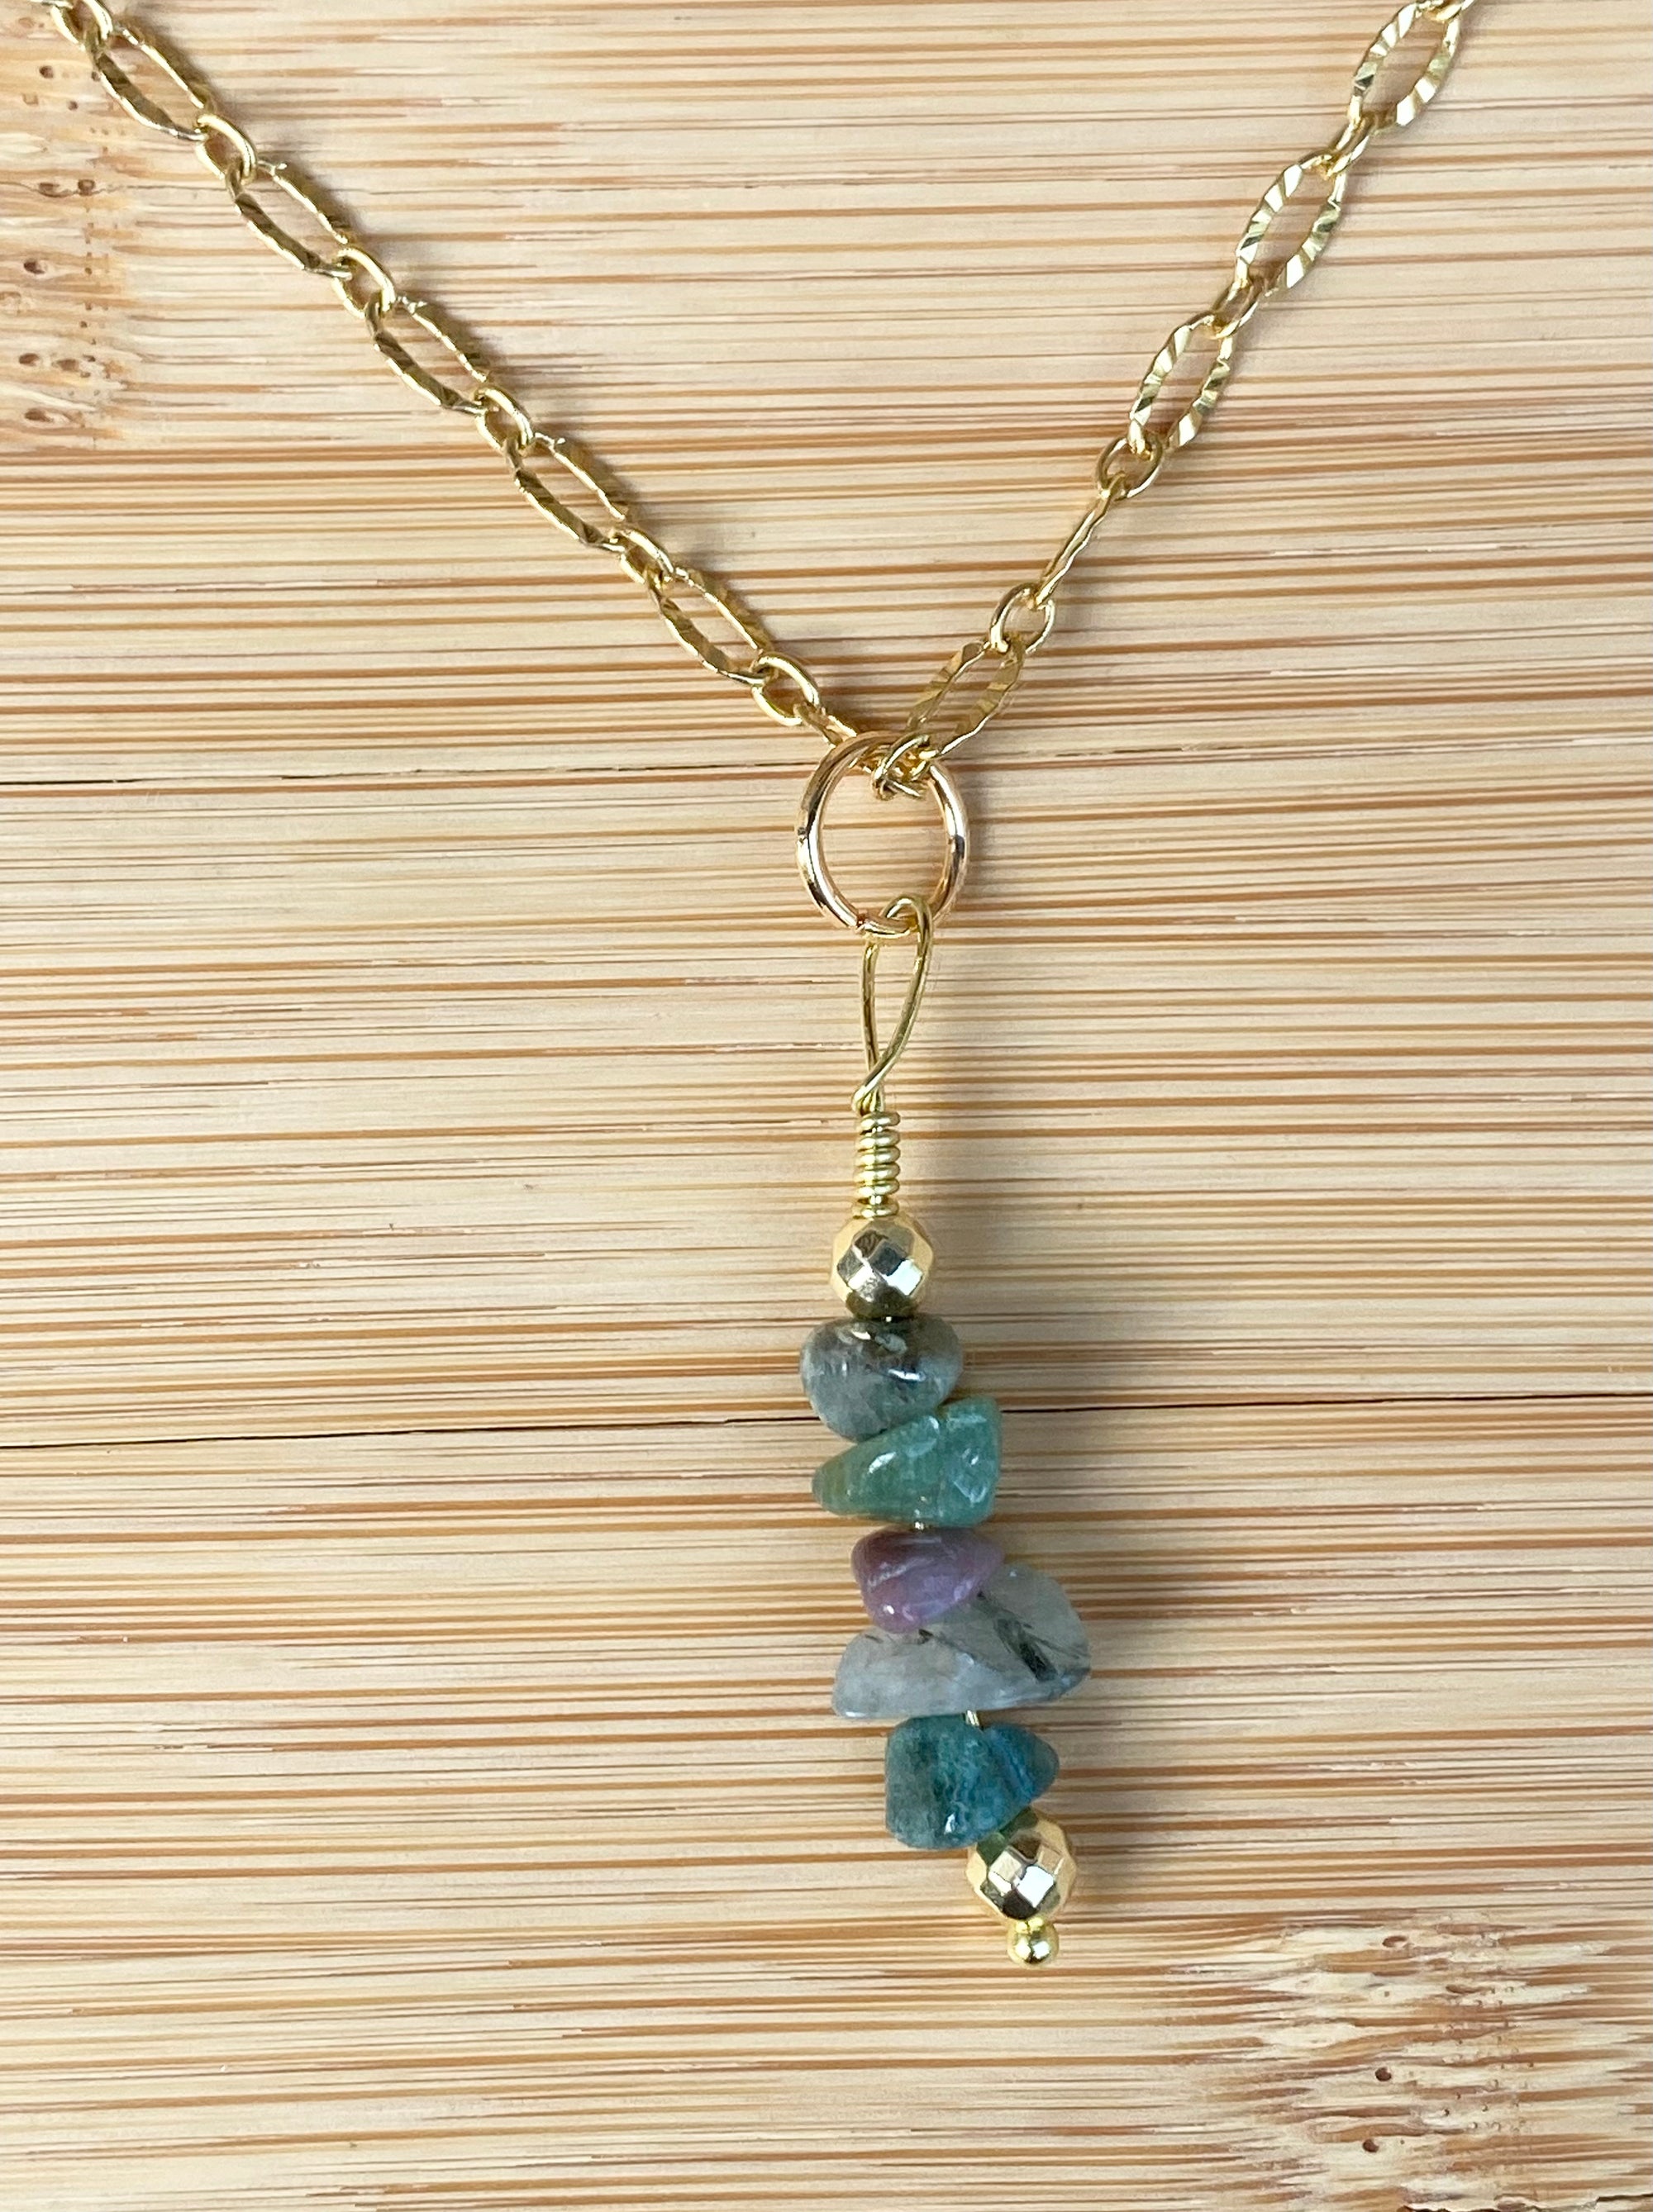 SAP MOSS GREEN Indian Agate Necklace